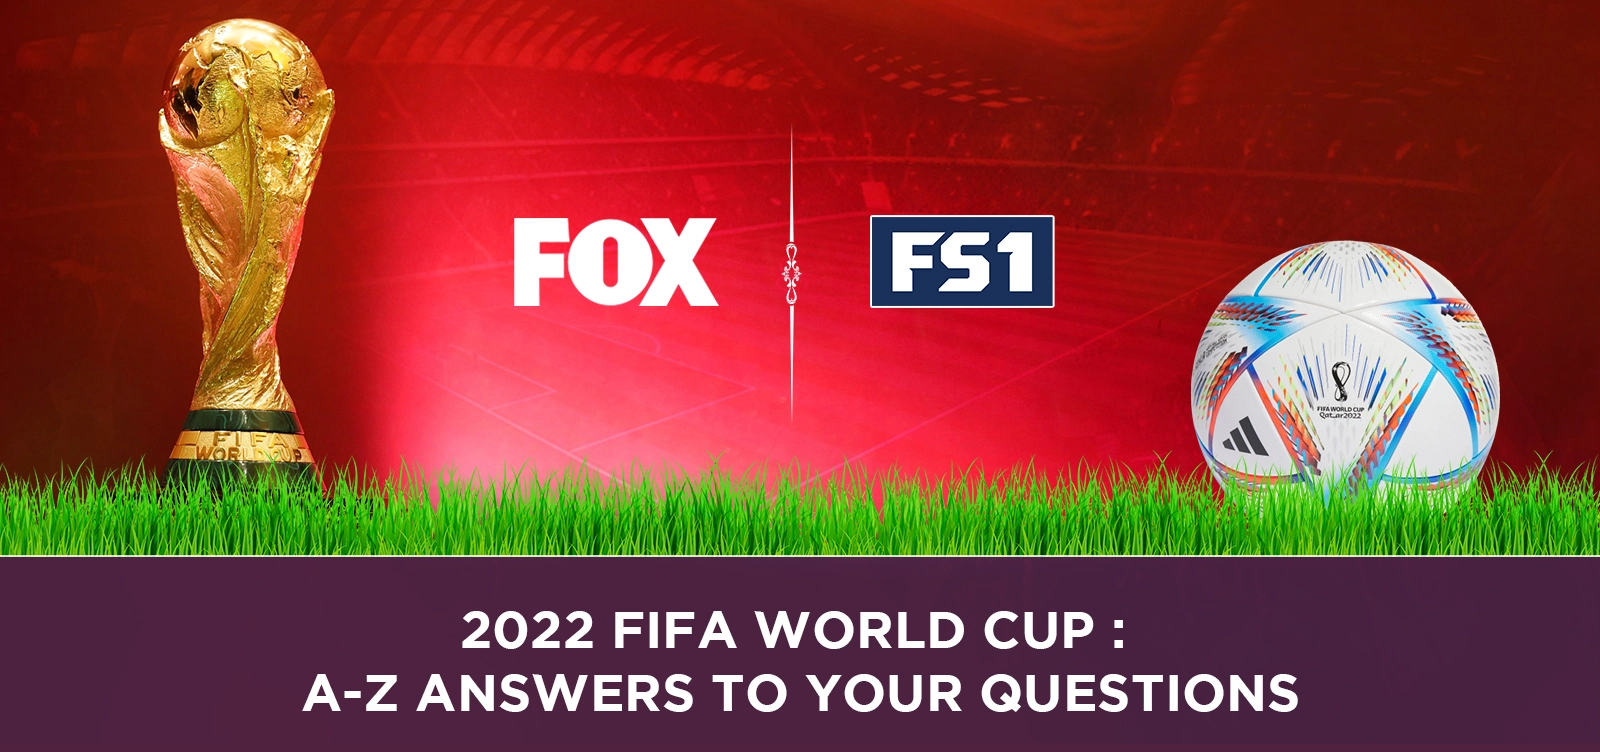 2022 Fifa World Cup: A-Z Answers to Your Questions